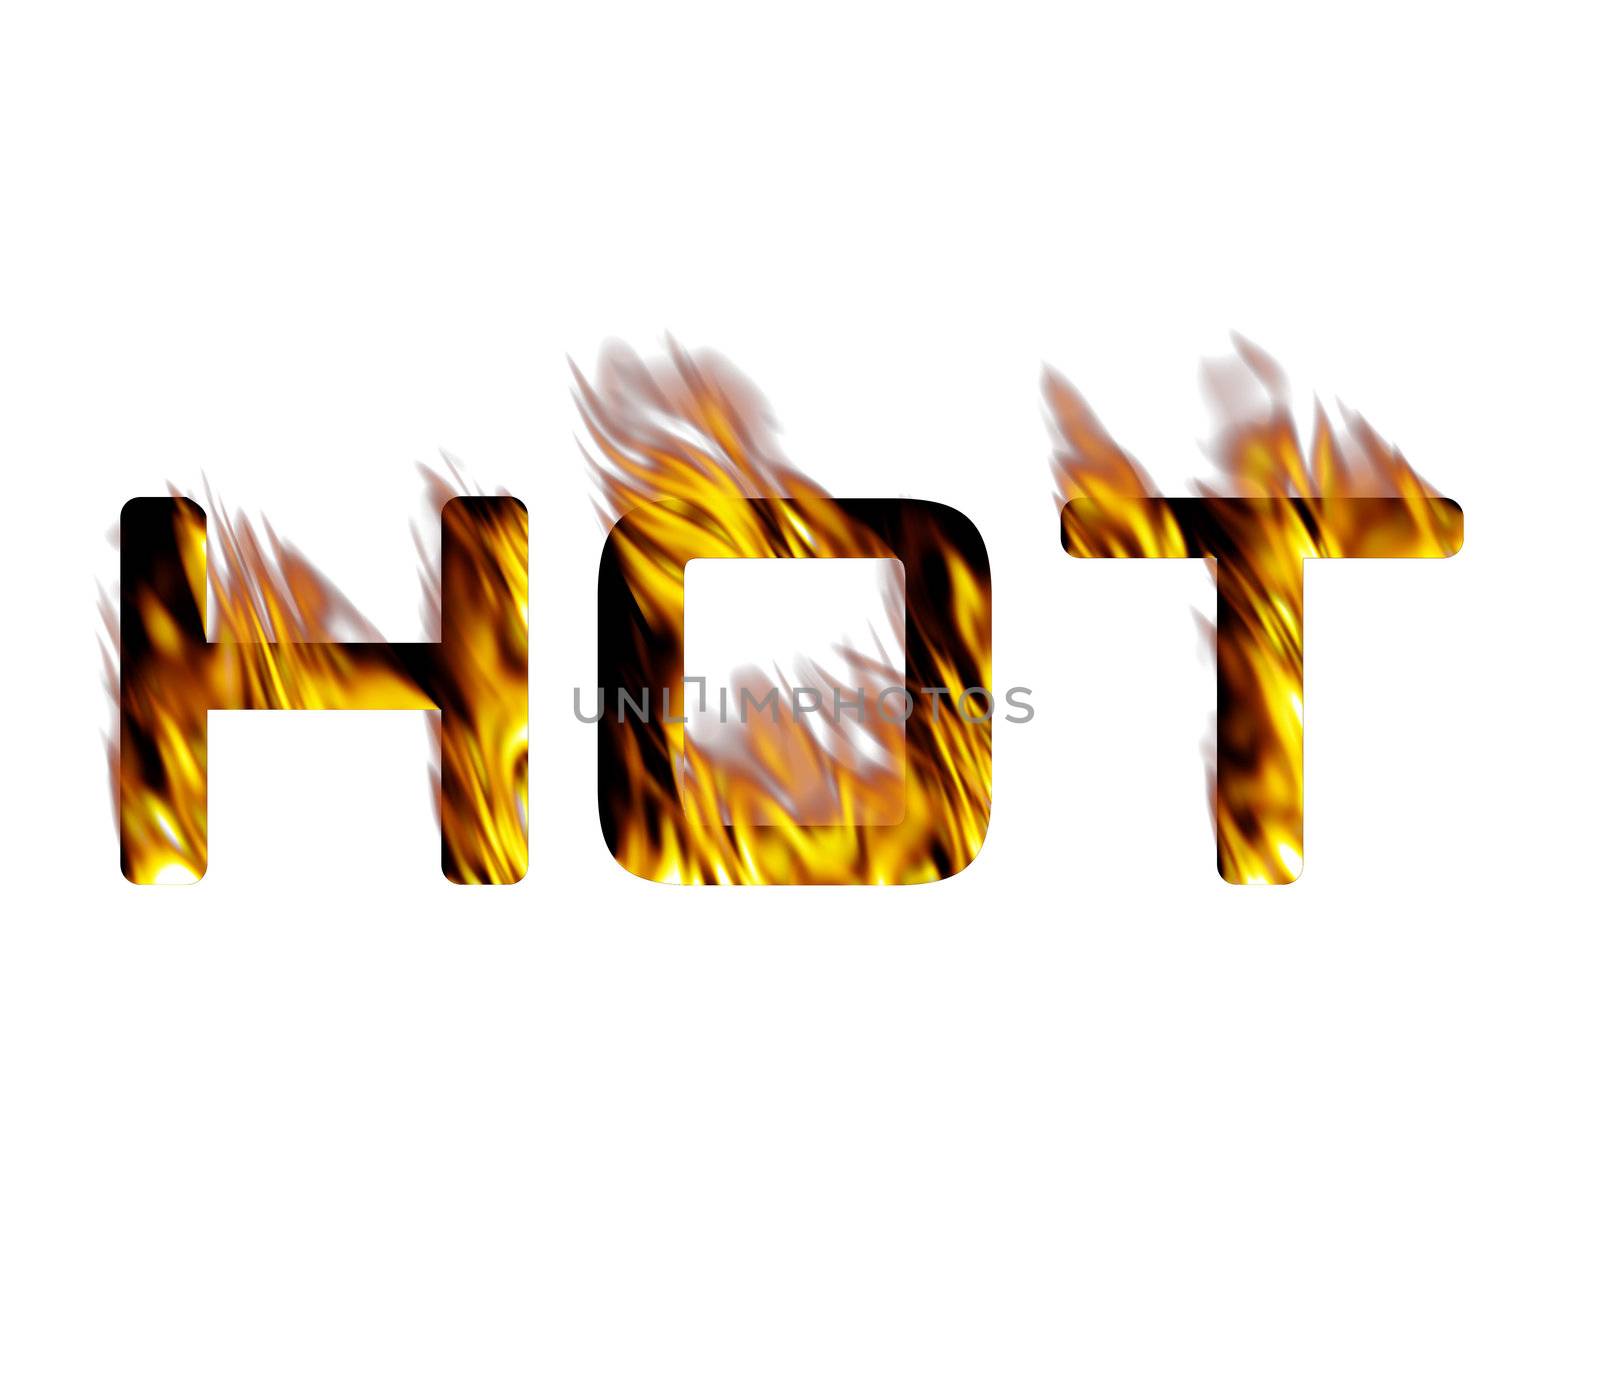 the word "hot" engulfed in flames - it can be used to denote something as "popular" or even warm weather conditions.